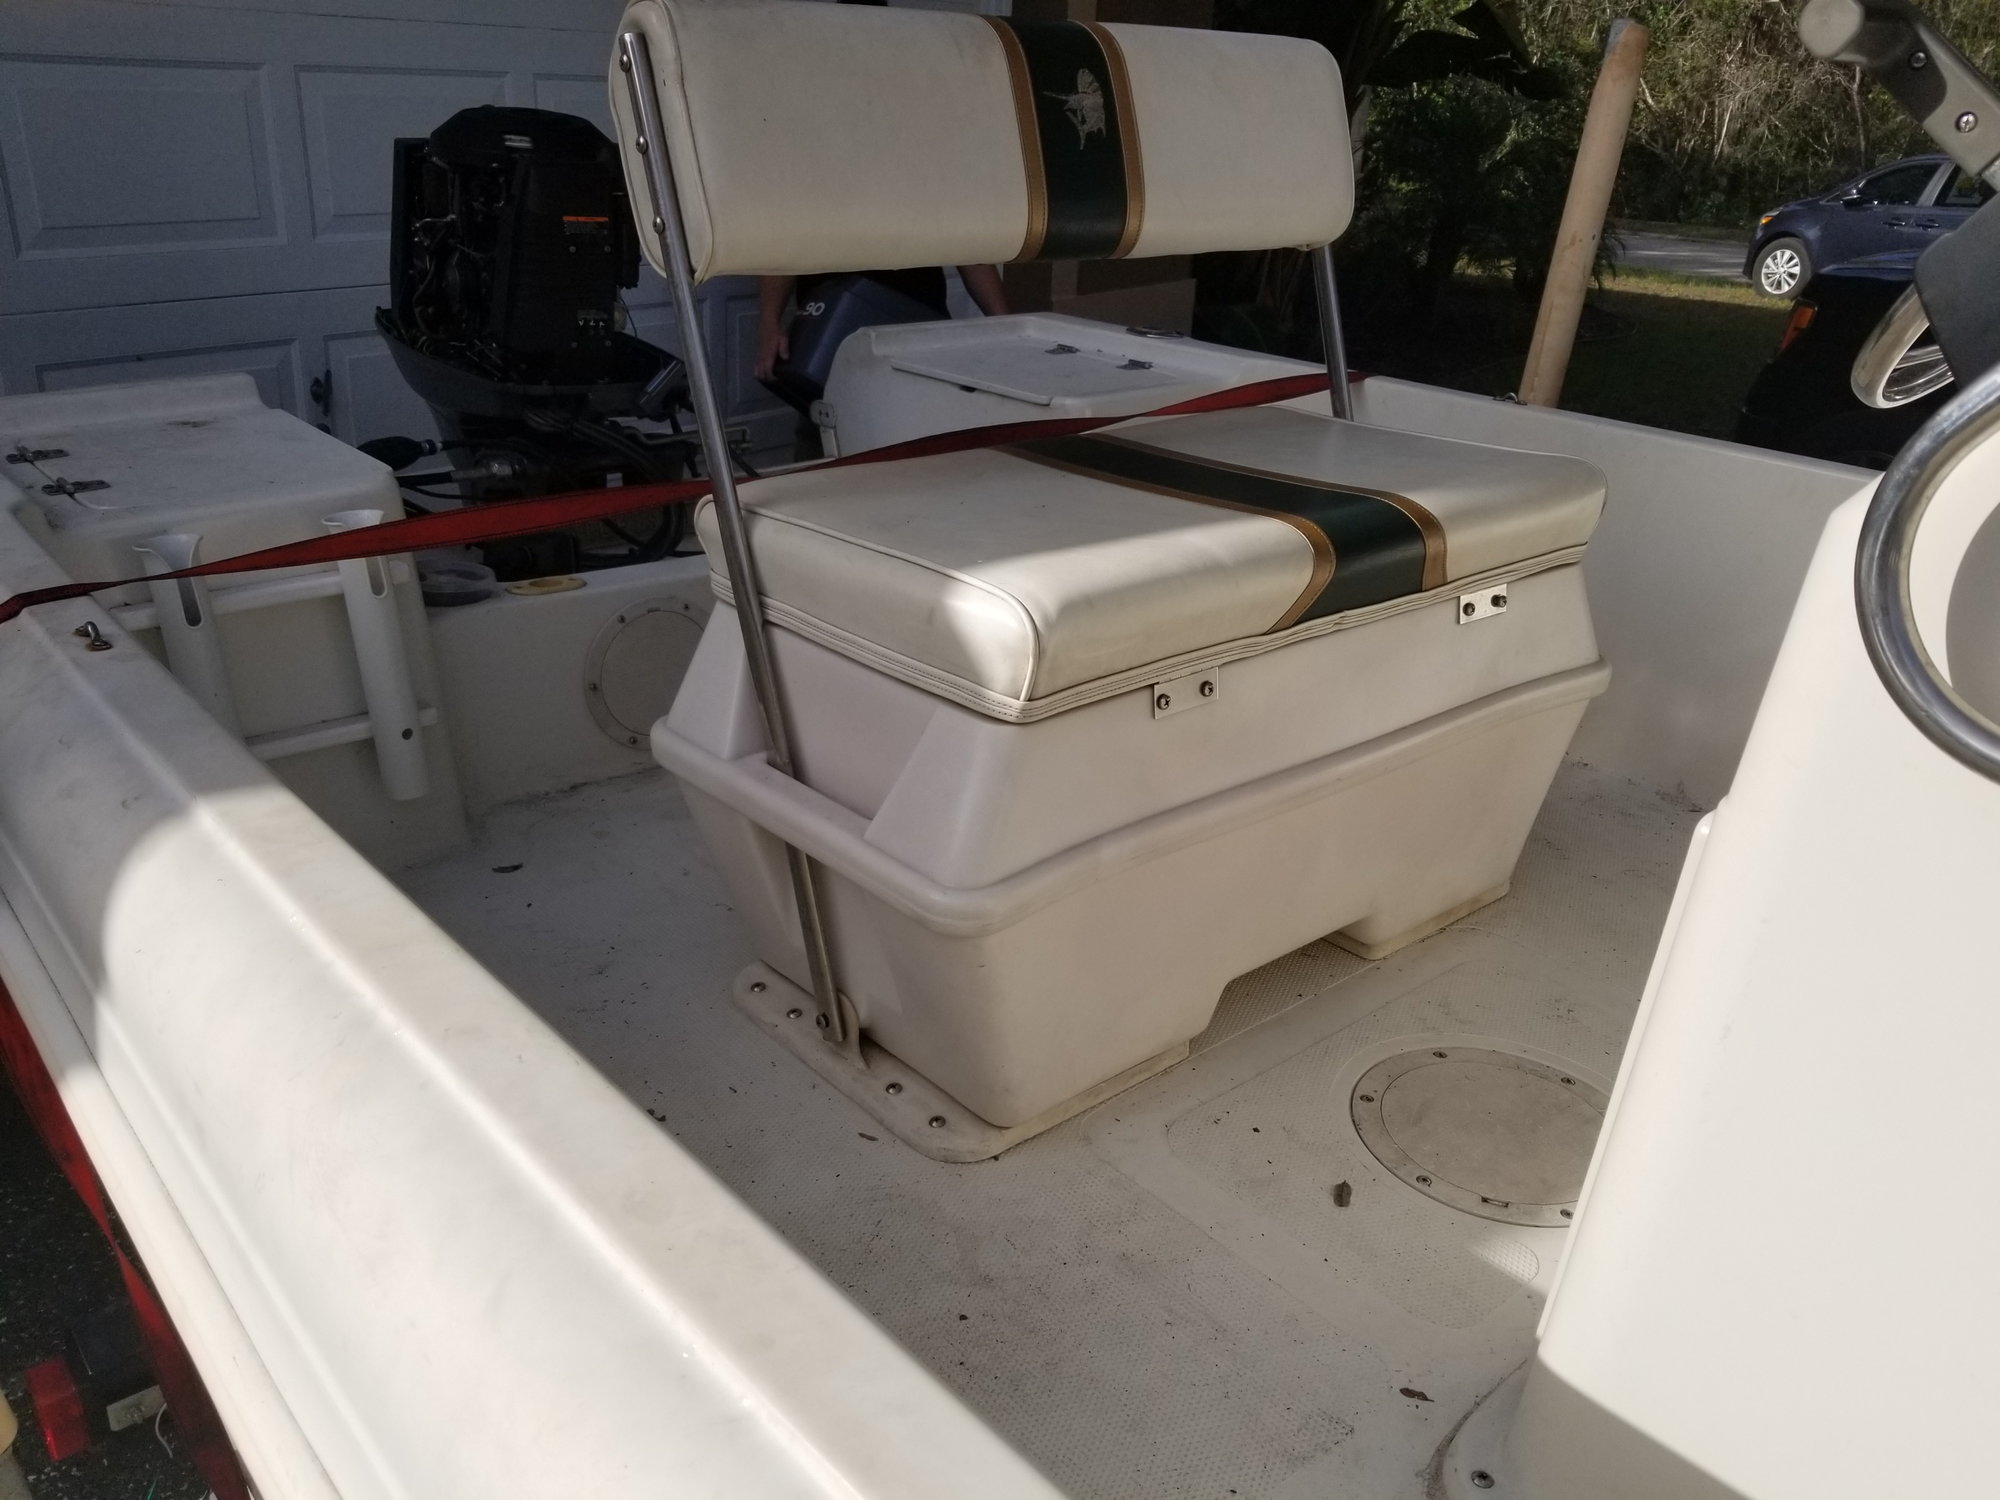 Flip flop cooler seat mods - The Hull Truth - Boating and Fishing Forum